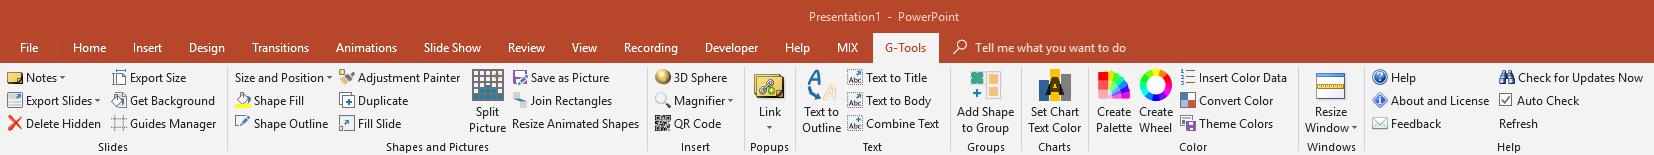 PowerPoint add-in : G-Tools Ribbon V1.97